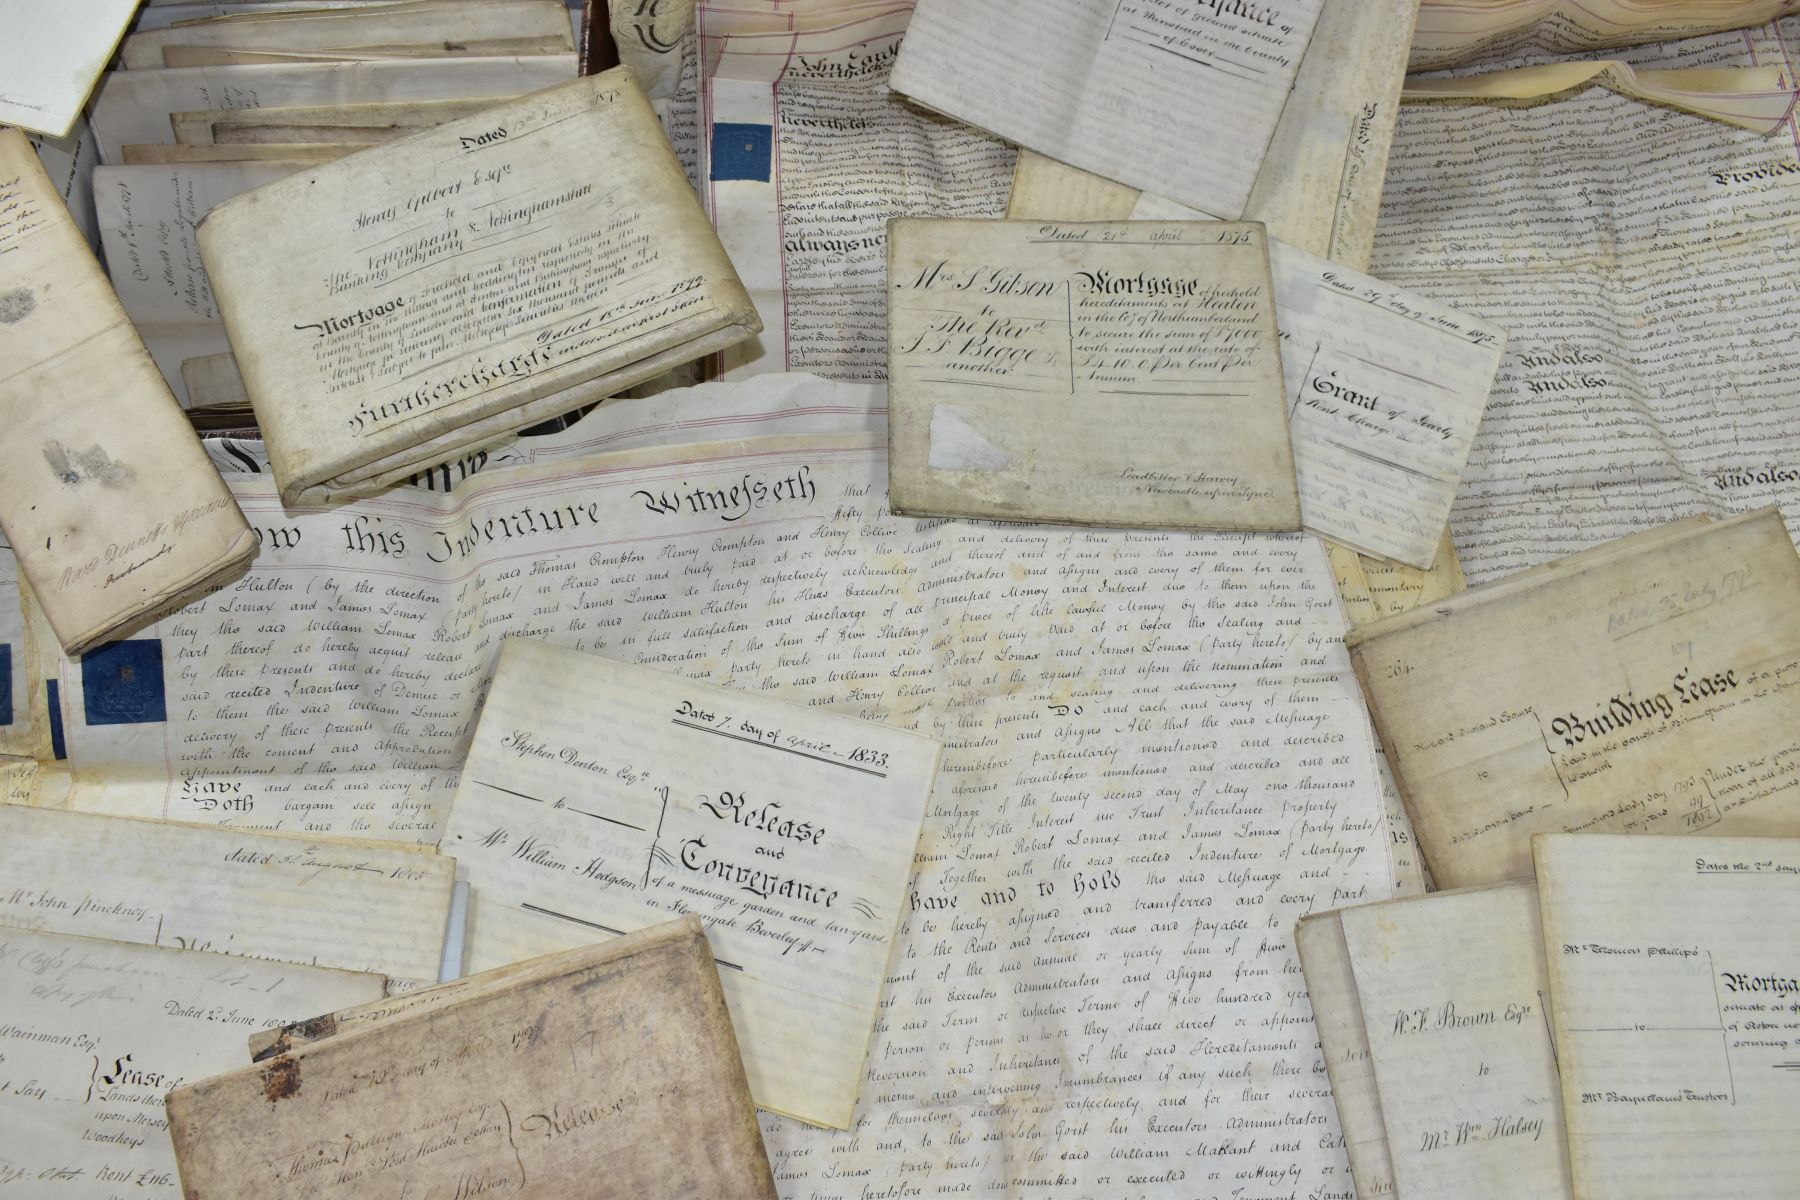 INDENTURES, a collection of approximately sixty-three legal documents dating from 1723 - 1879 and